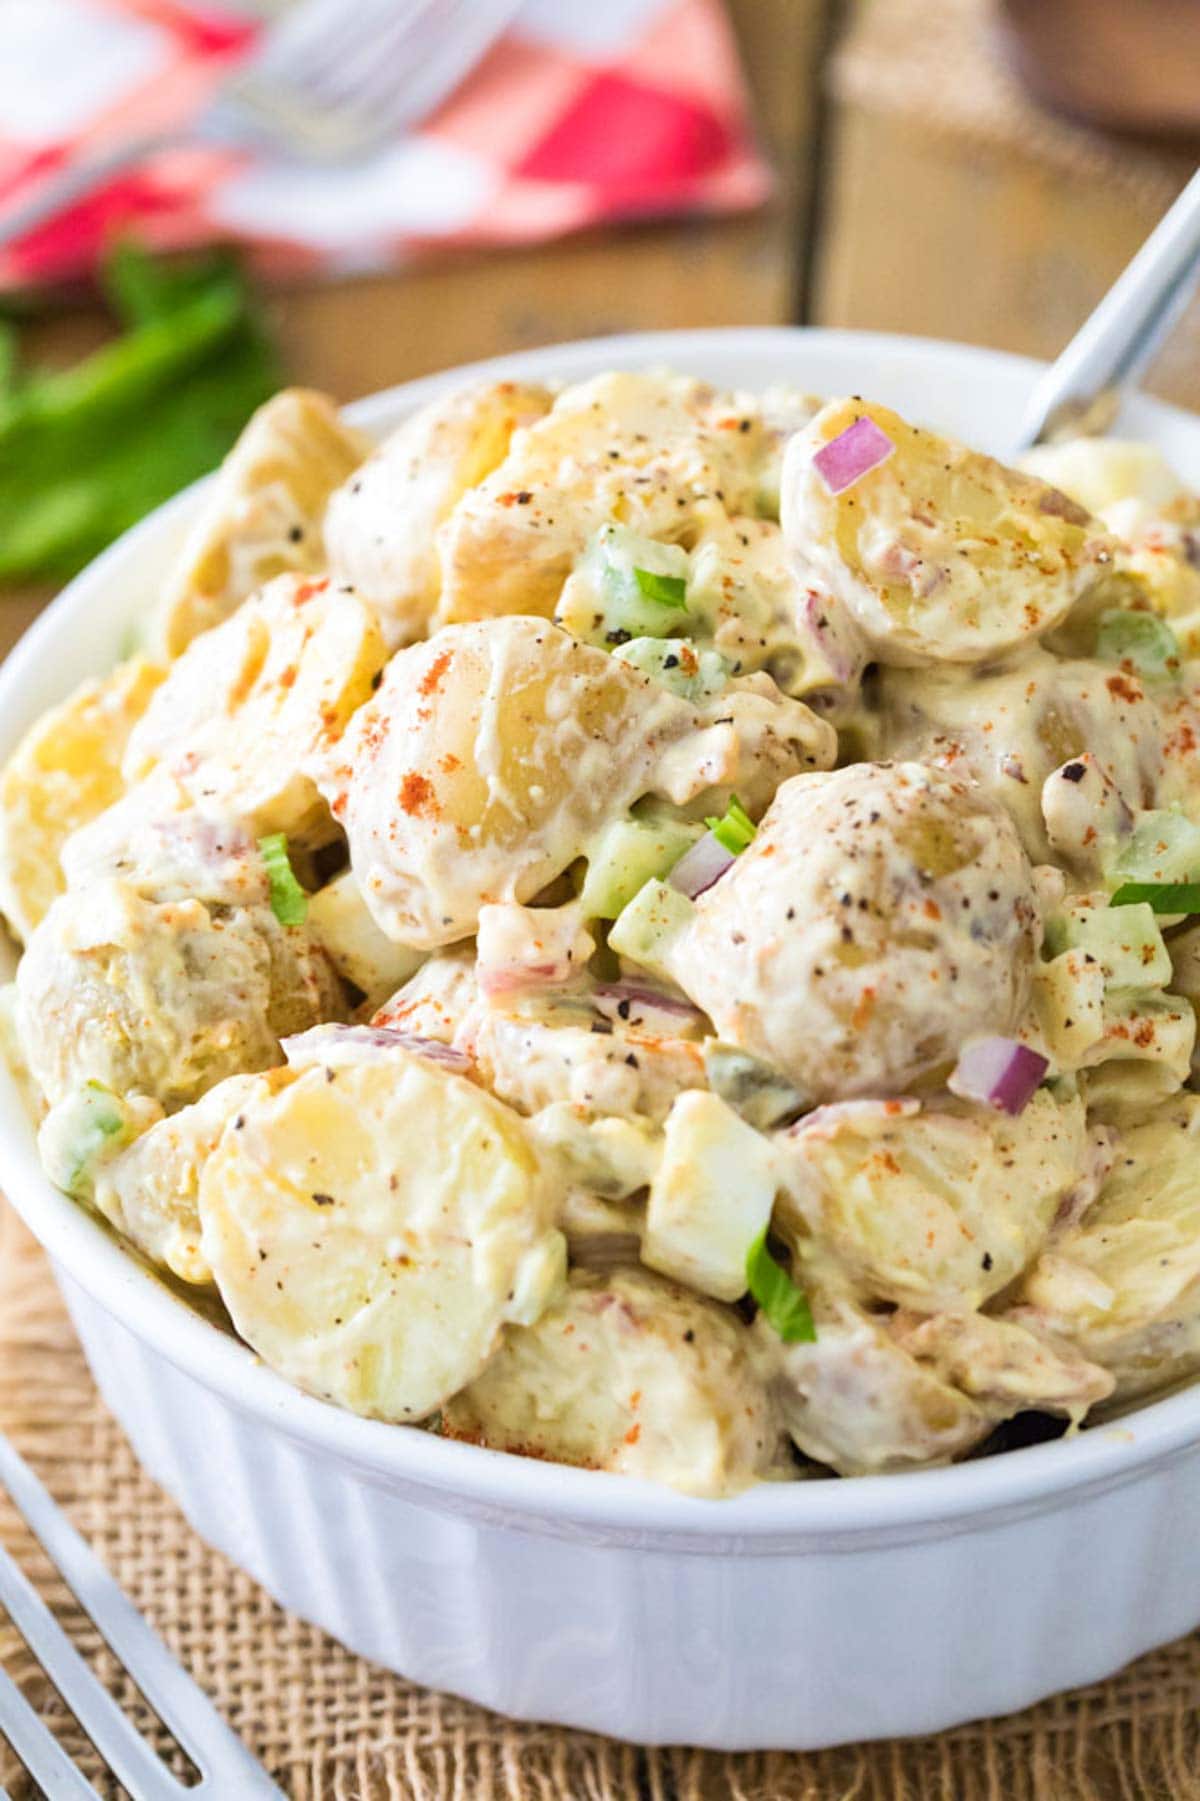 Close-up view of potato salad made with celery, onions, and more in a large white serving bowl.